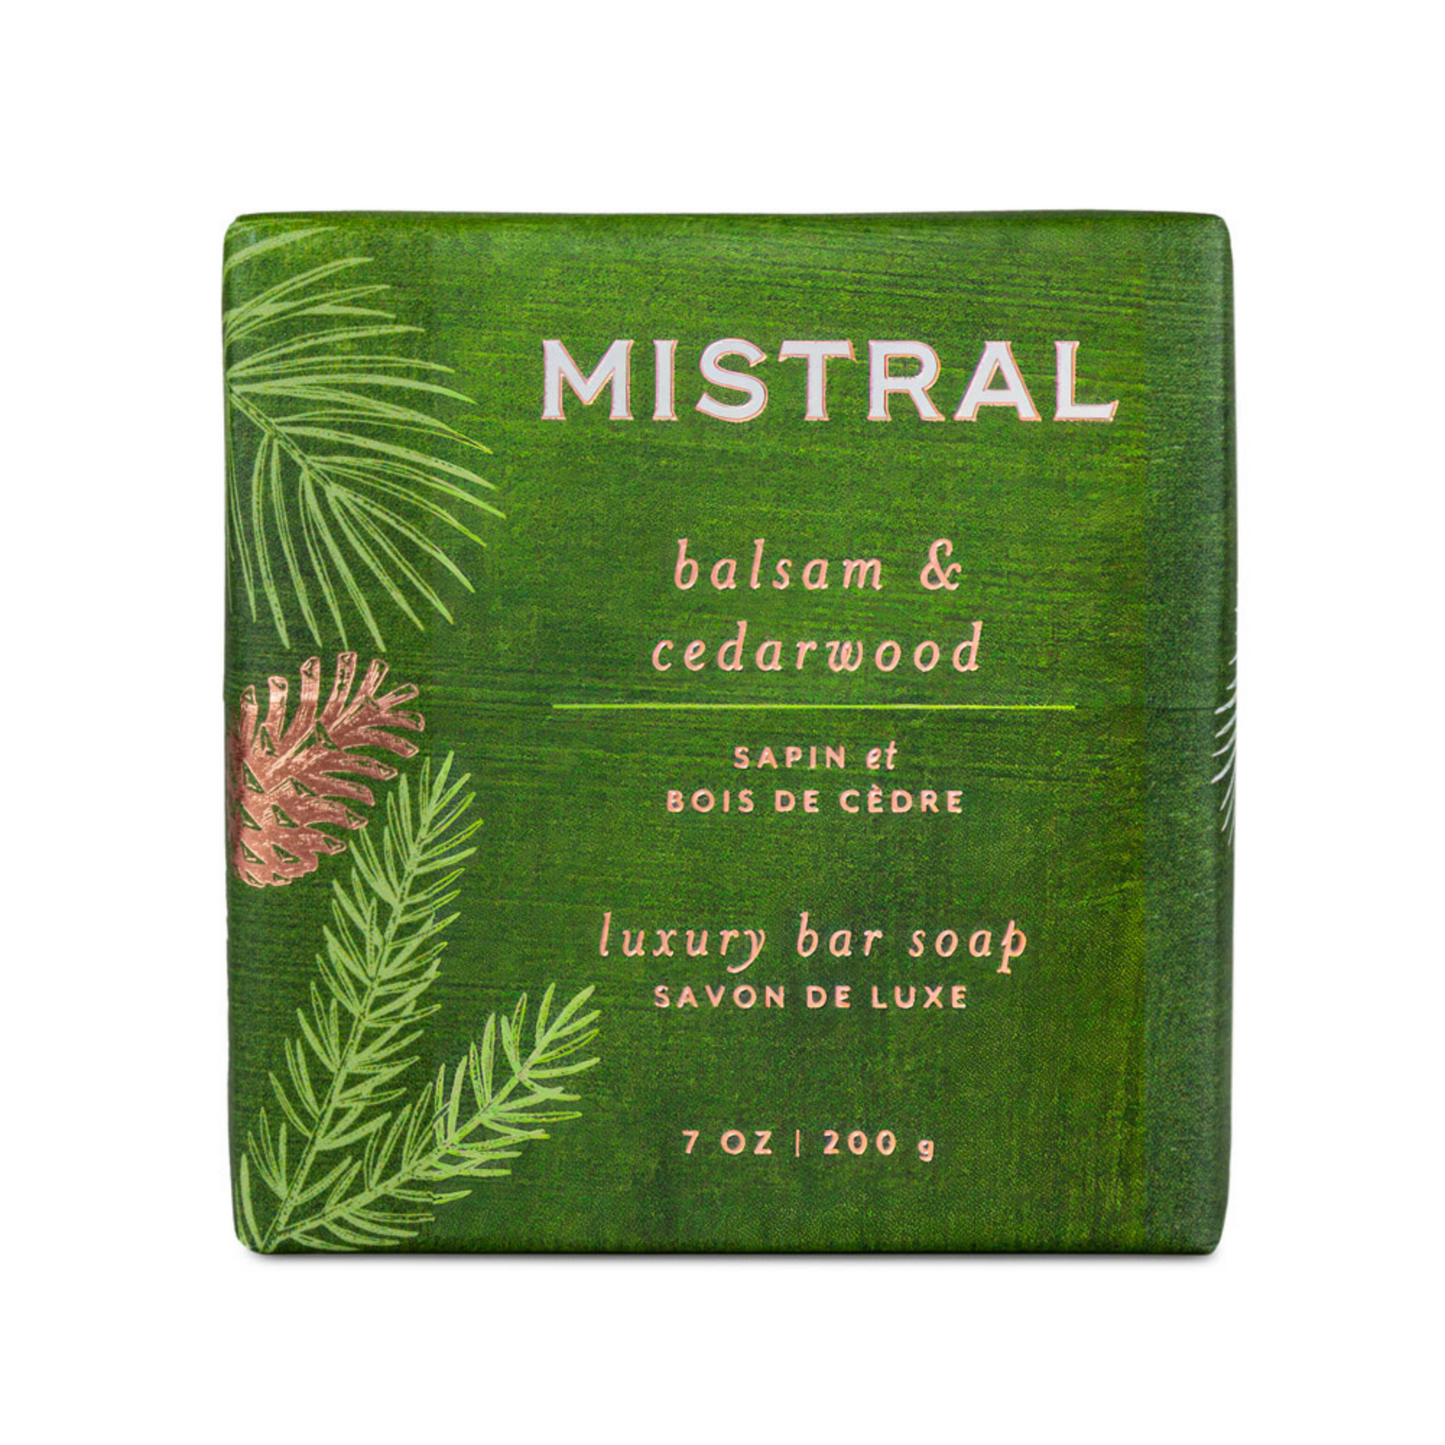 Primary Image of Balsam and Cedarwood Bar Soap